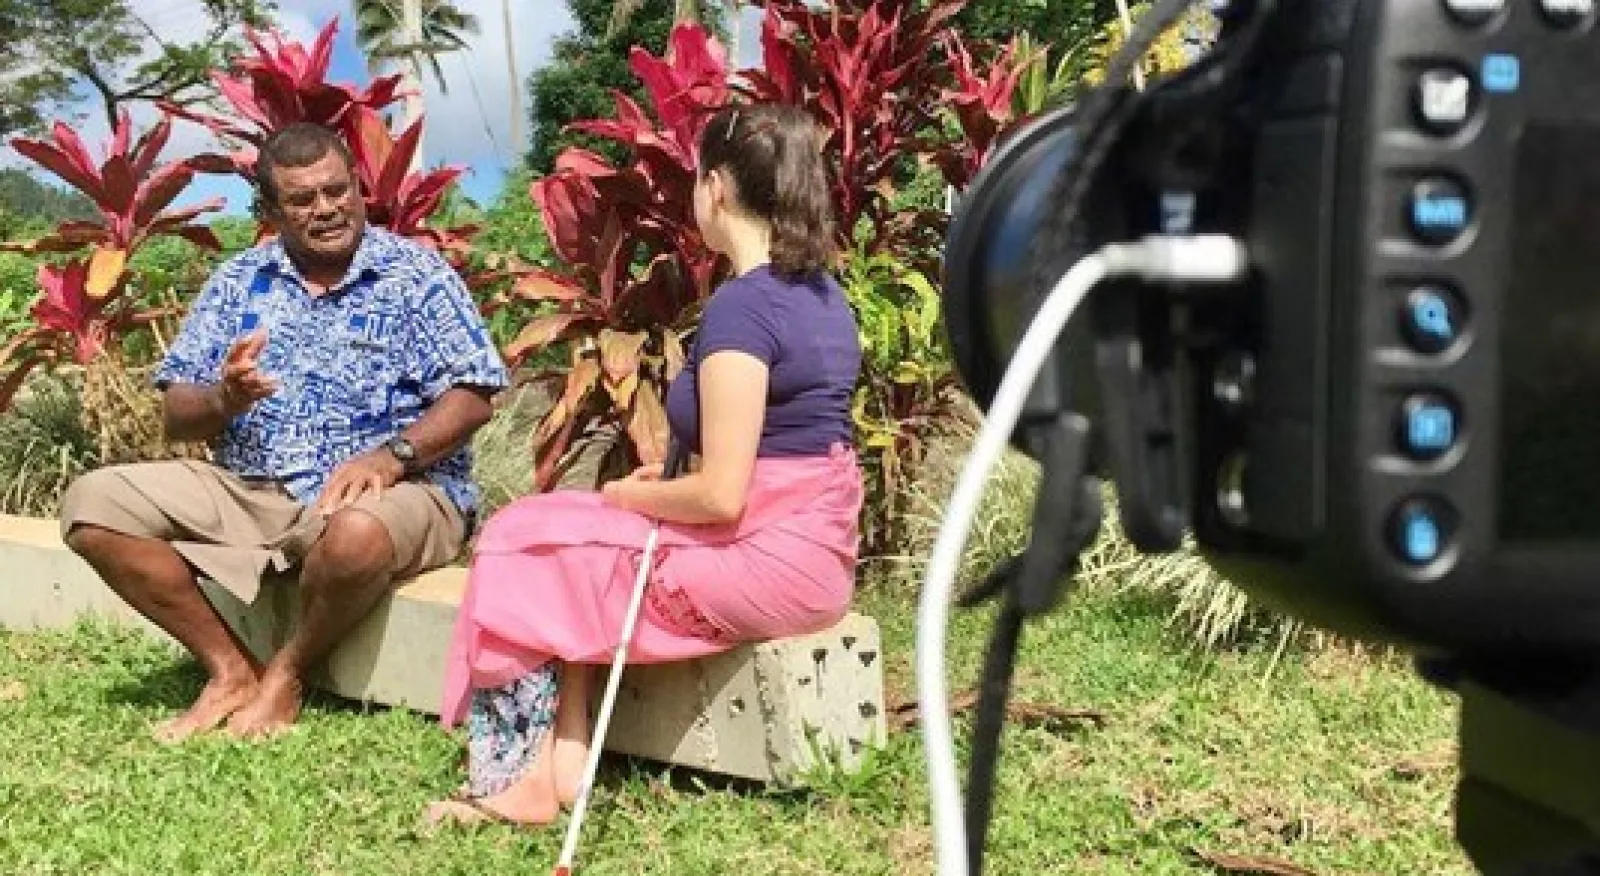 Two people sitting on a bench talking. The man is explaining something to the woman, who has a white cane by her side. They are being filmed by a camera.